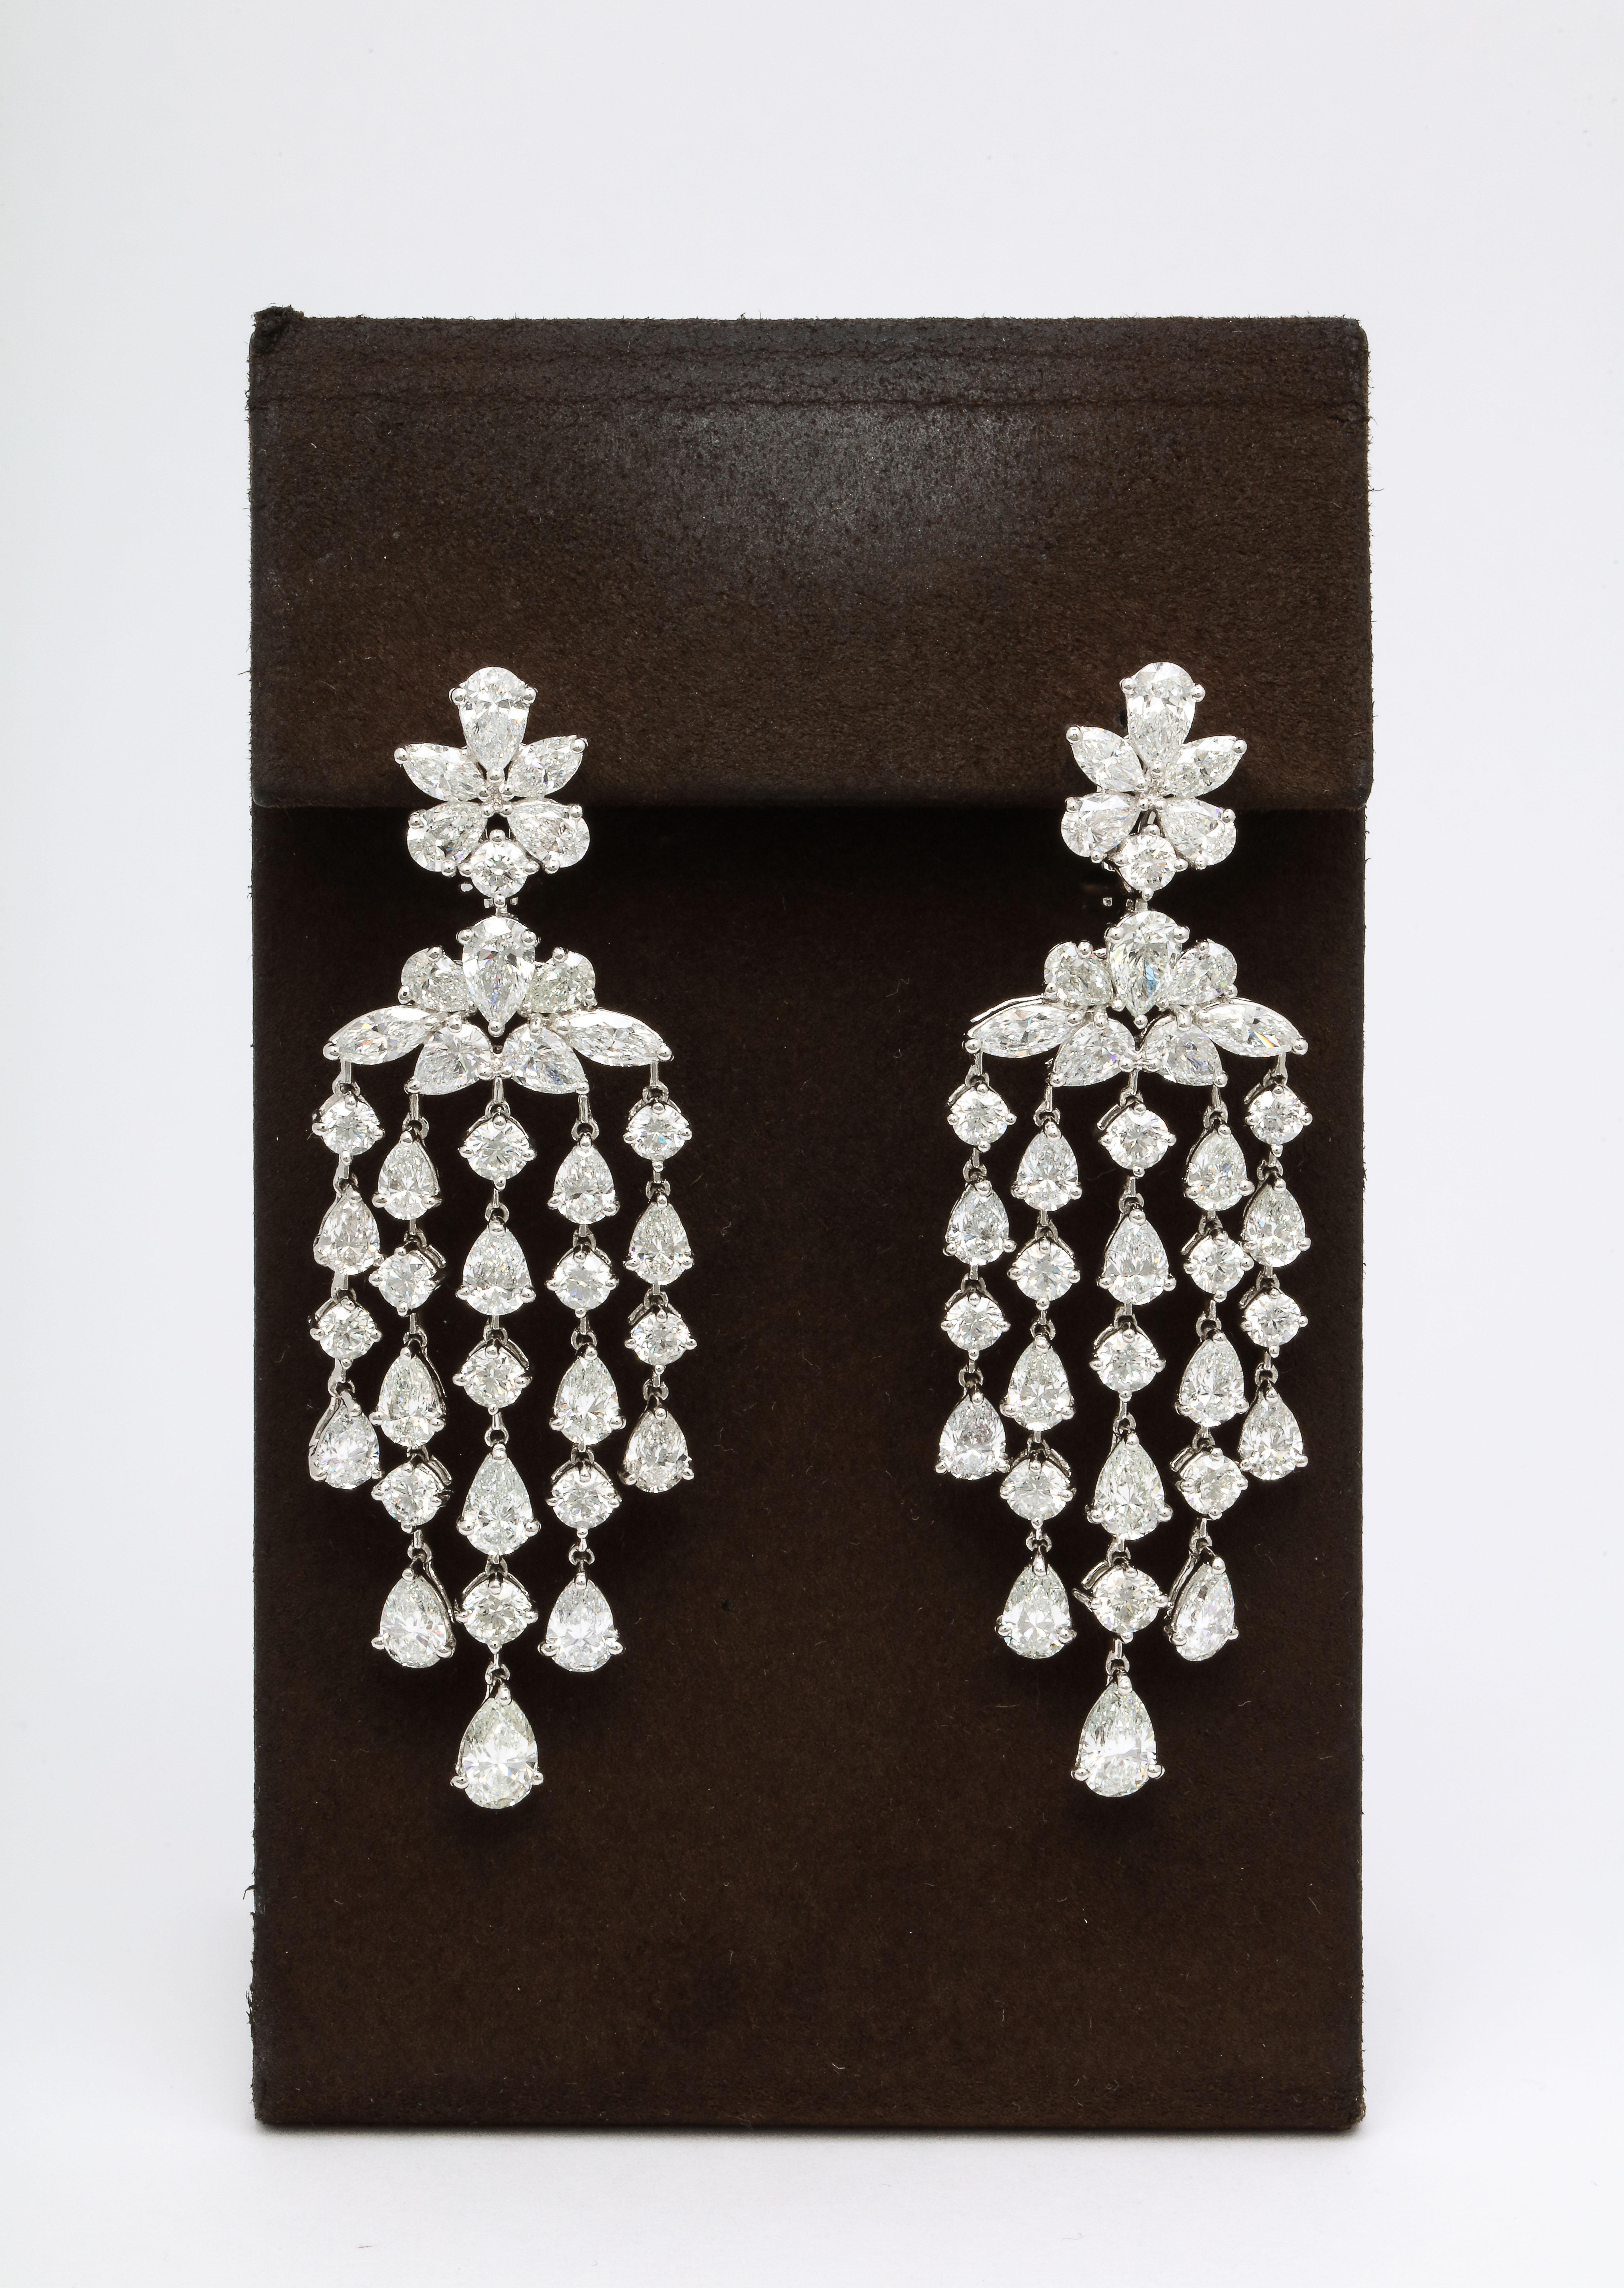 
A beautiful earring with tons of sparkle and movement. 

25.42 carats of white round, pear and marquise shaped diamonds set in platinum. 

2.85 inches long 
